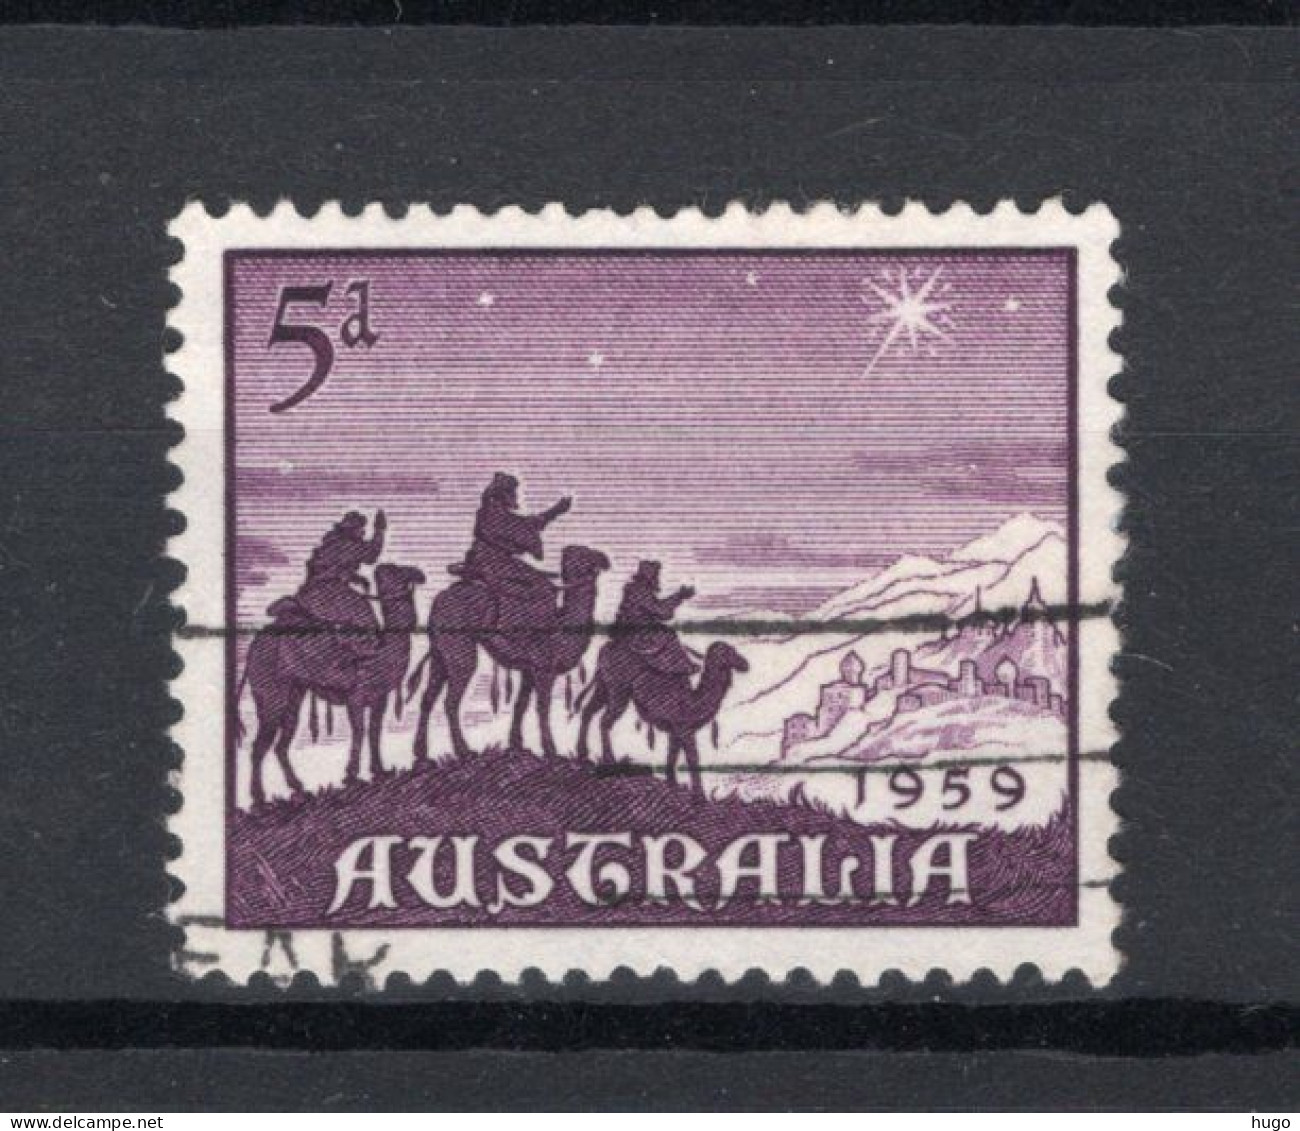 AUSTRALIA Yt. 262° Gestempeld 1959 - Used Stamps